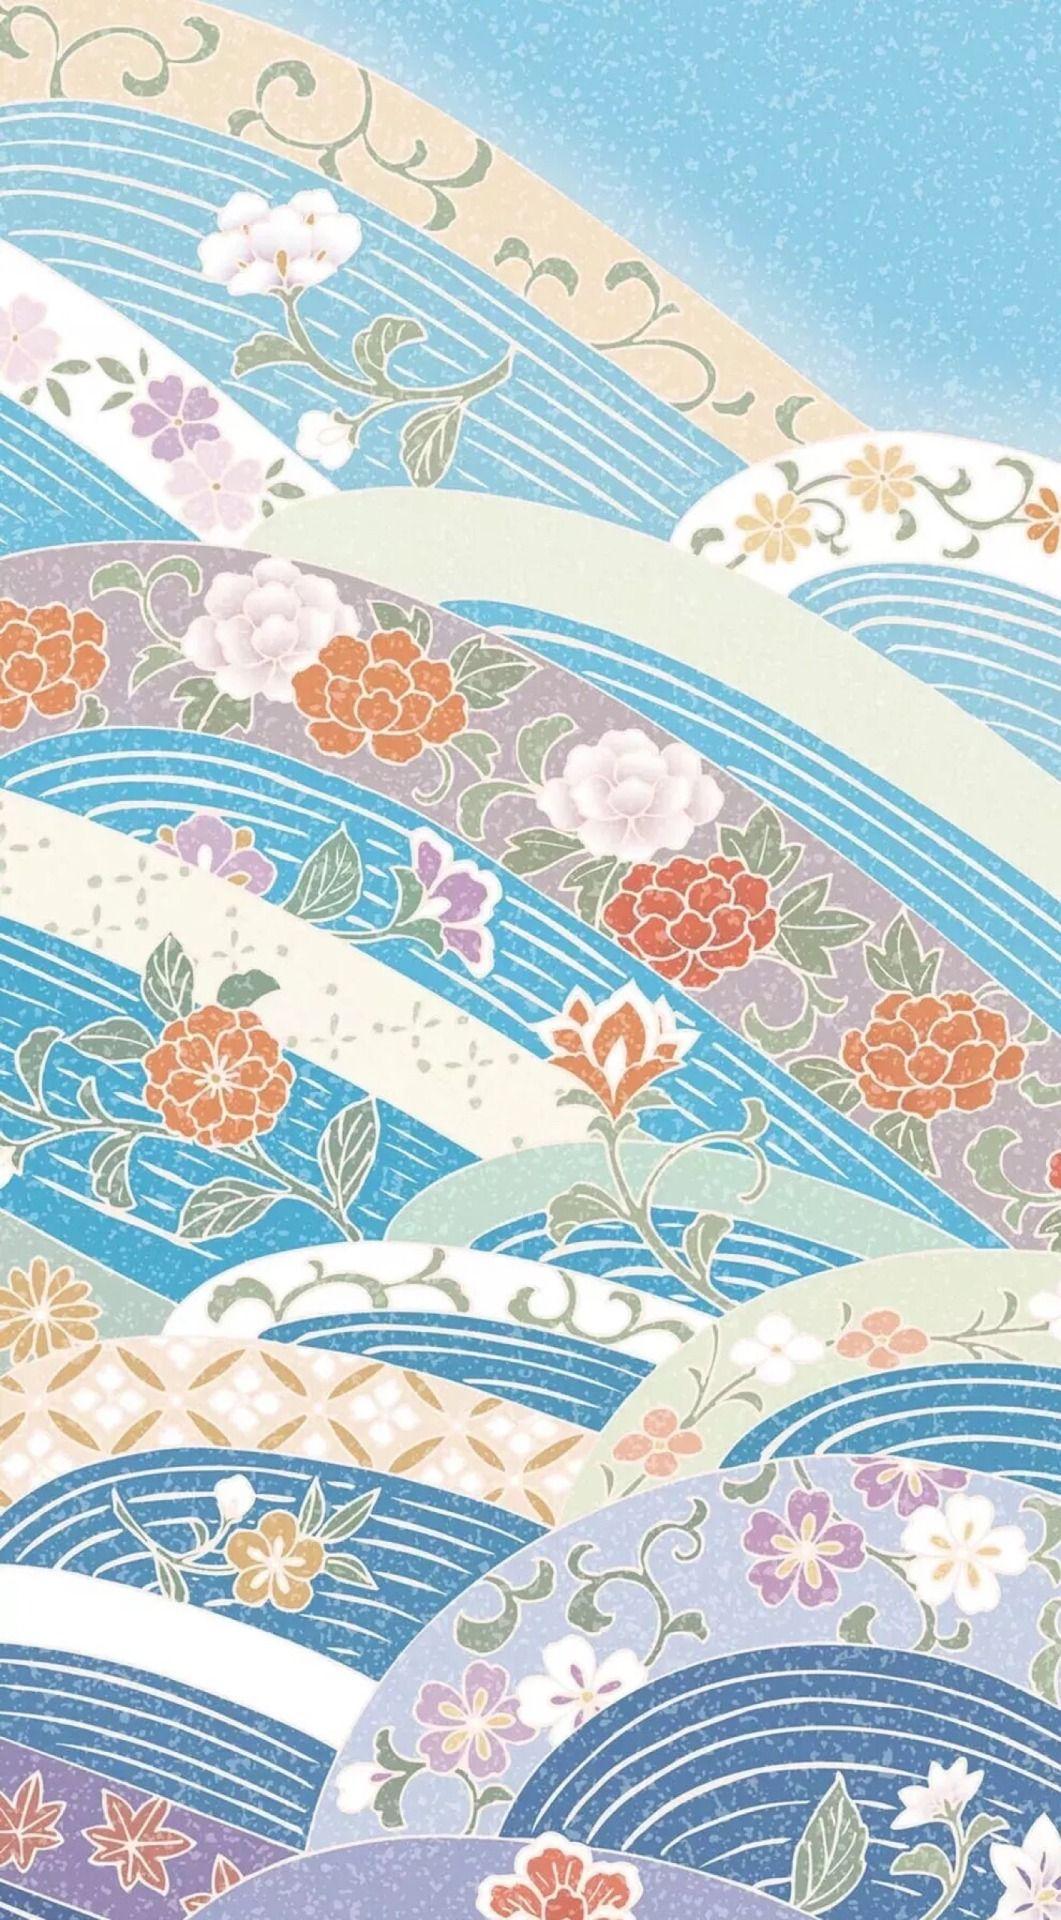 Japanese Pattern Wallpapers - Top Free Japanese Pattern Backgrounds